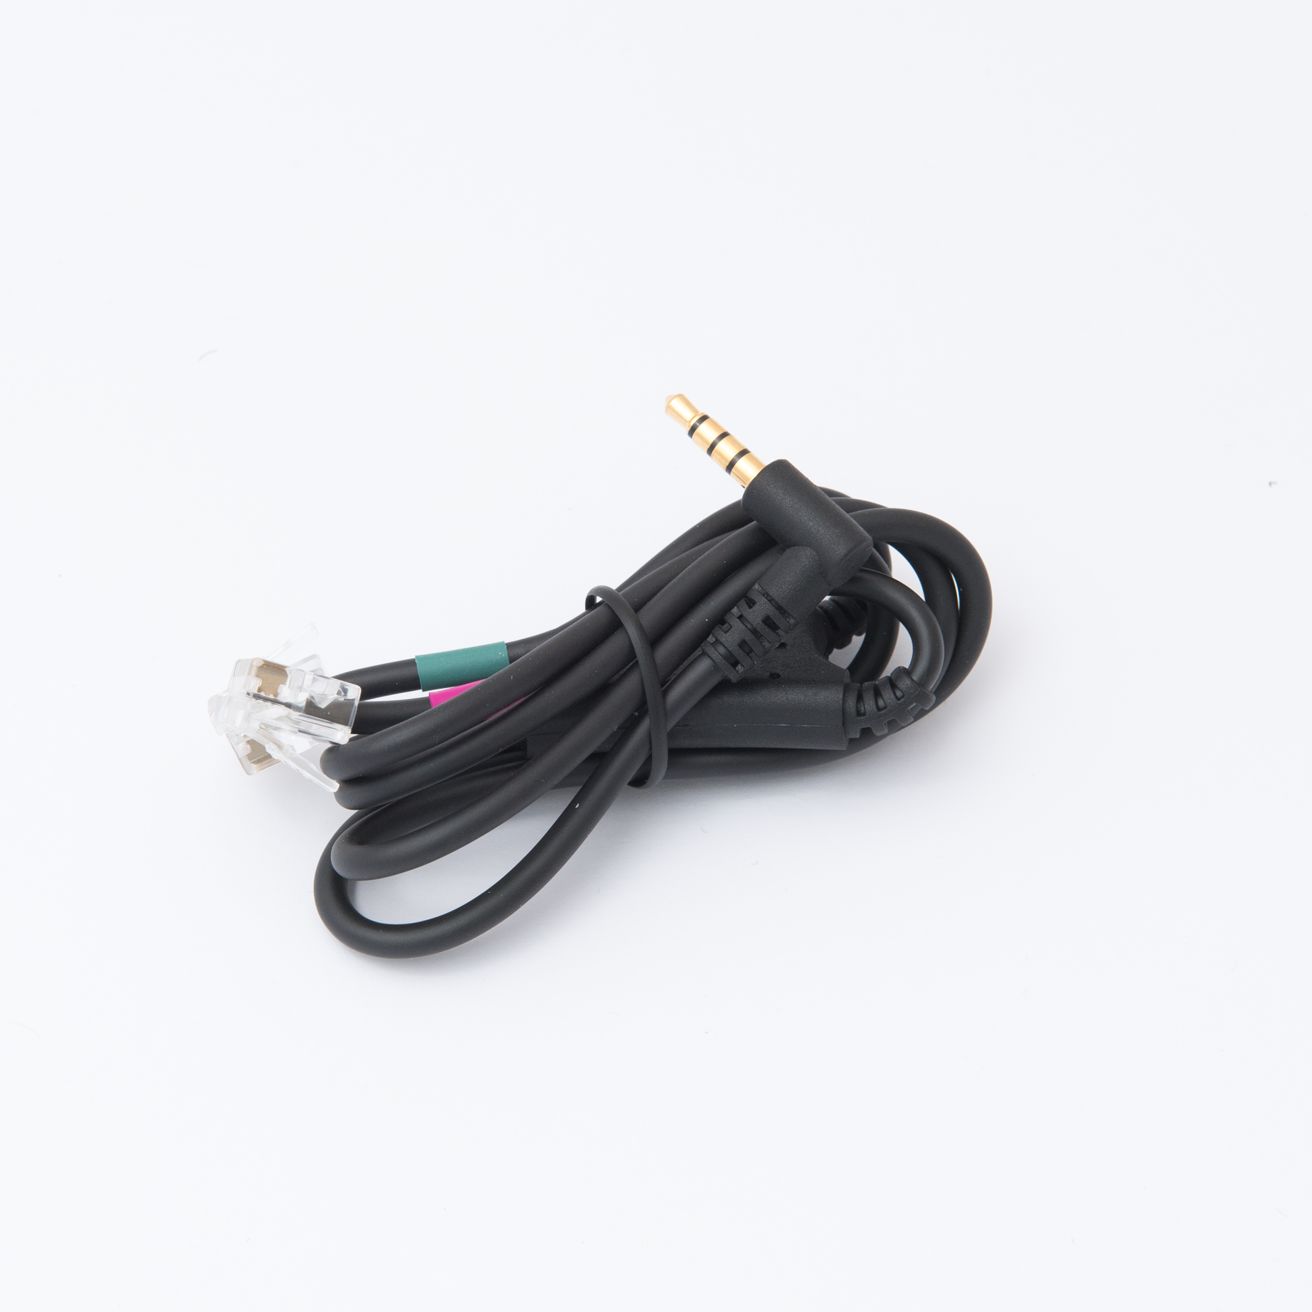 EPOS  Sennheiser Audio Cable for Mobile phone to connect to DW base